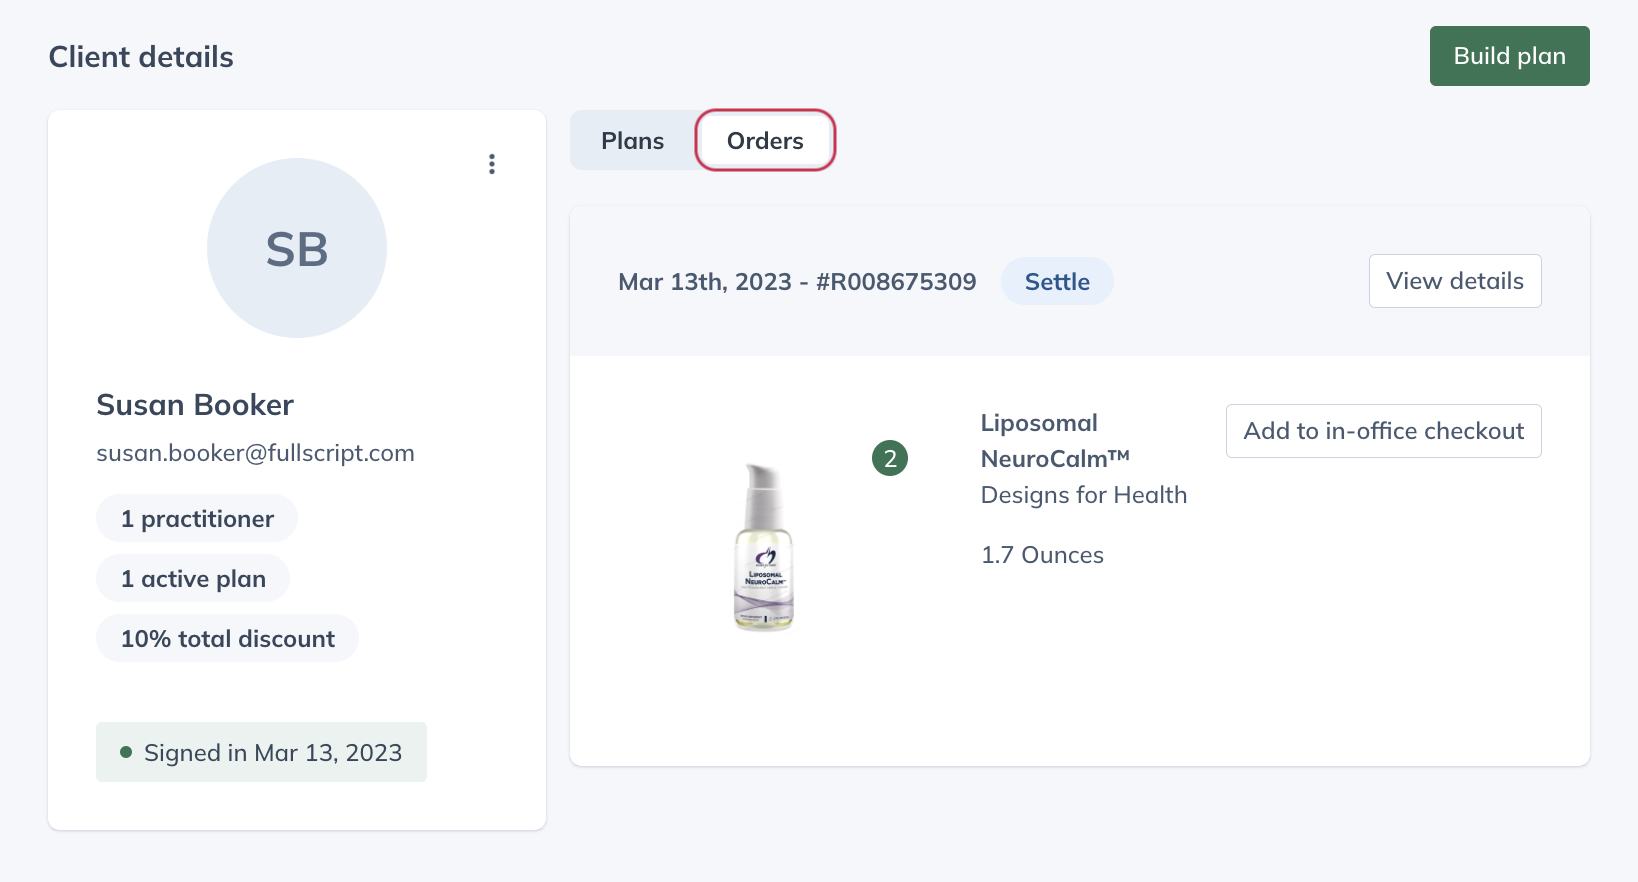 Click orders to view patient order history